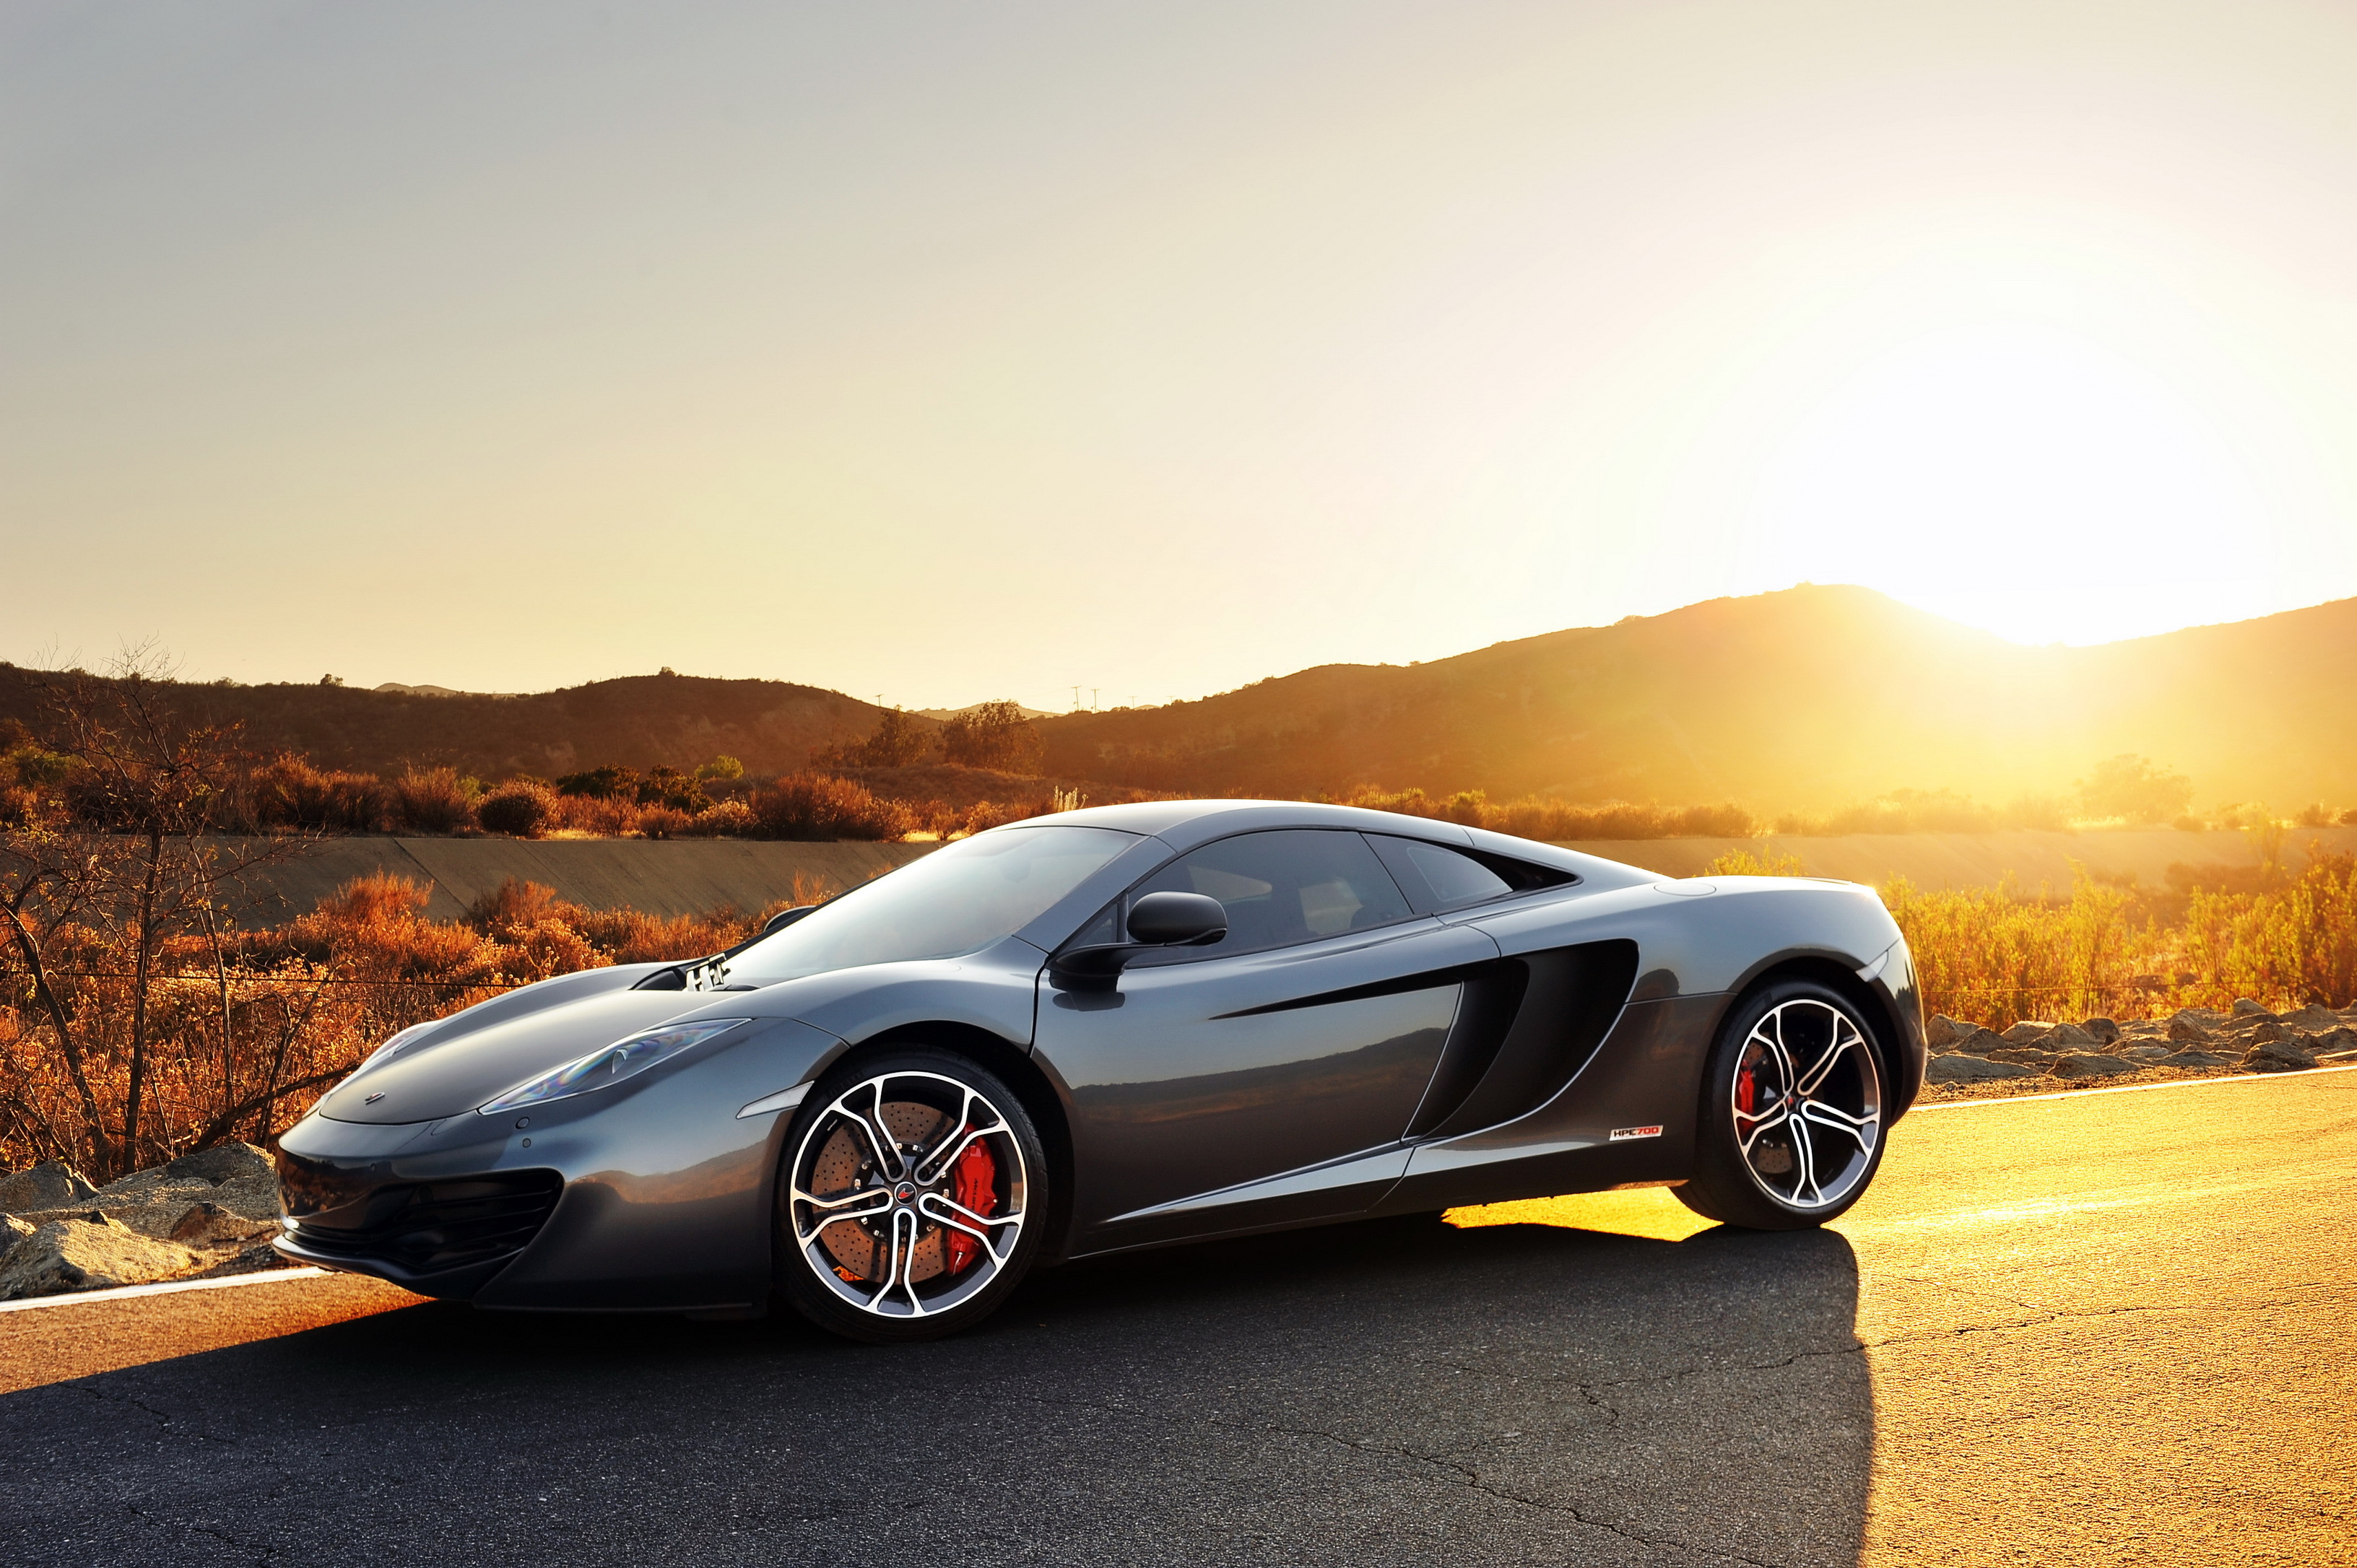 109531 download wallpaper supercar, cars, sports, sunset, mclaren, car, grey, mp4-12c, kar, cirque screensavers and pictures for free